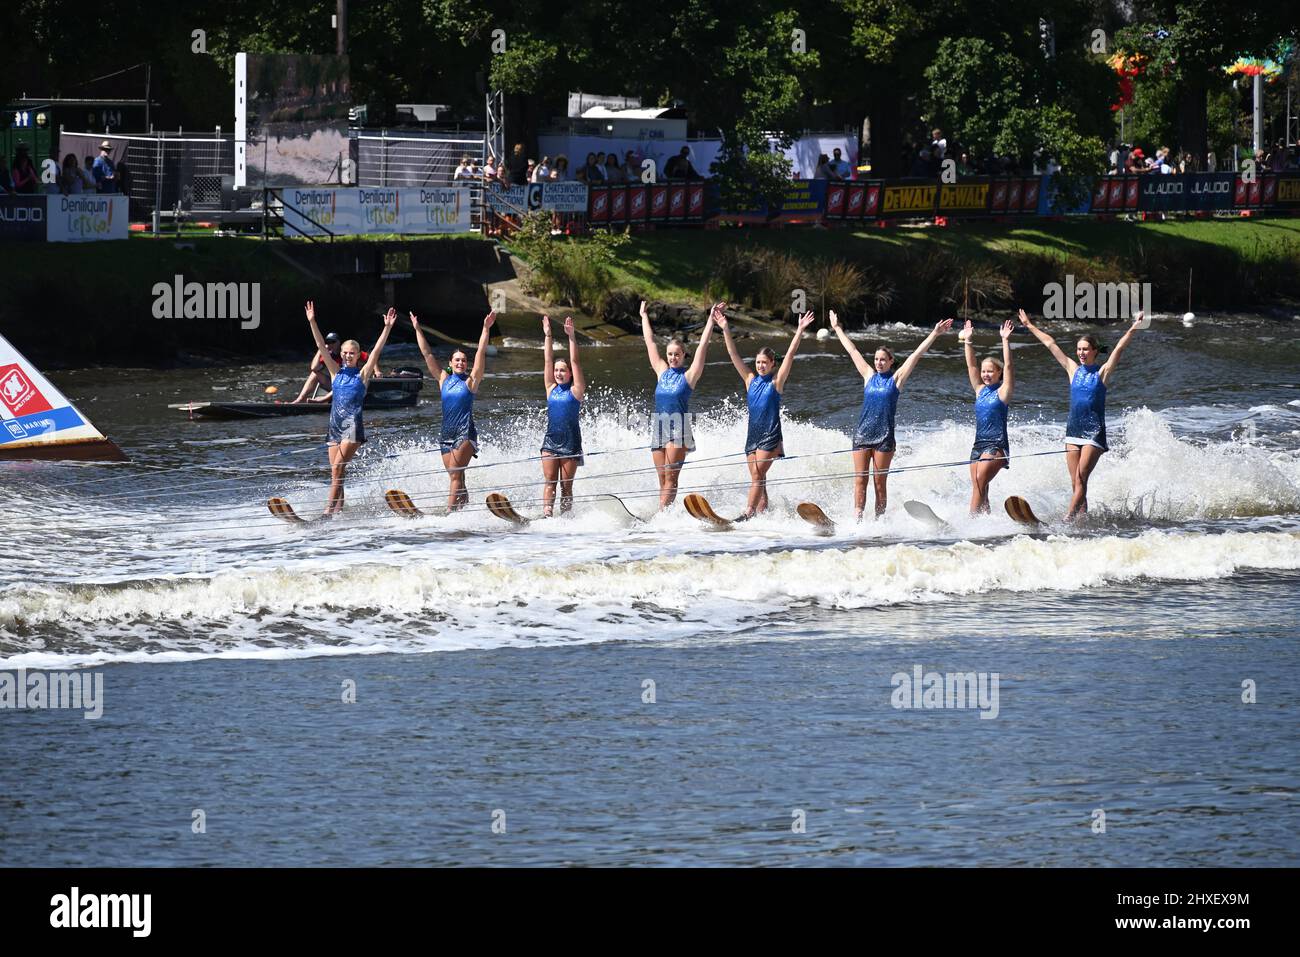 Eight women, in blue costumes, skiing alongside one another with both arms raised at the 2022 Moomba Masters Ski Show Stock Photo